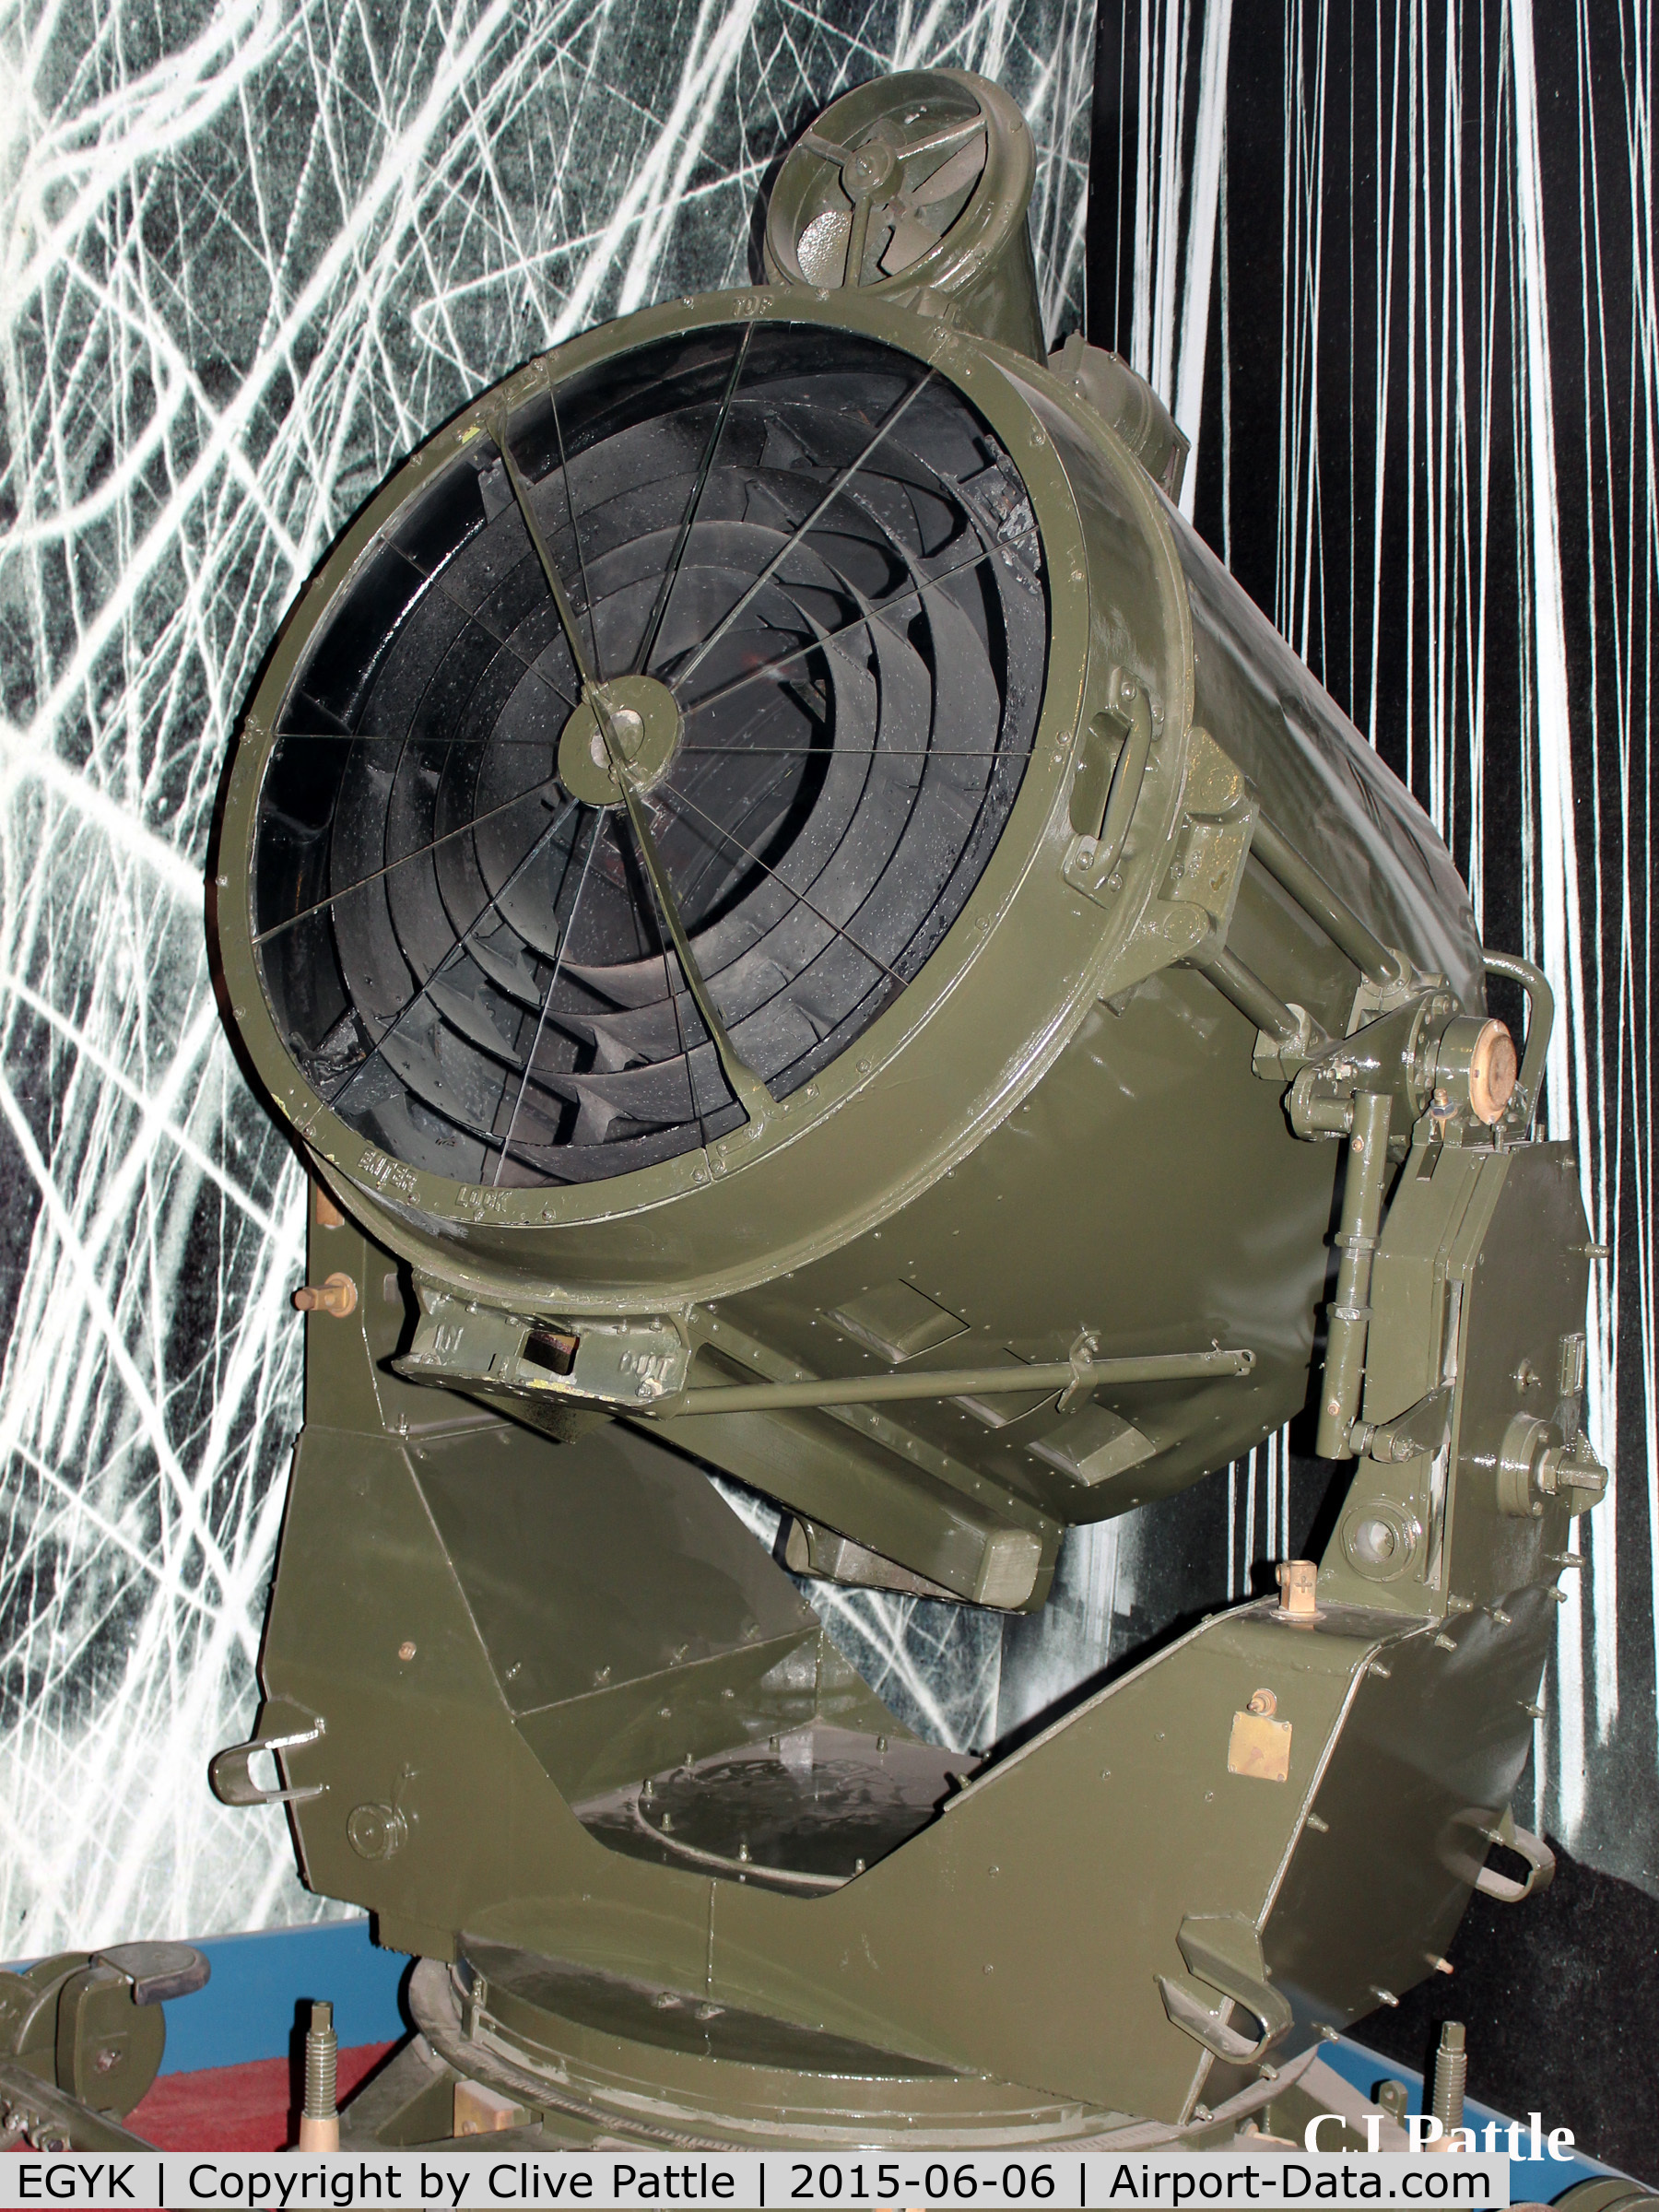 EGYK Airport - A WWII aircraft searchlight on display within the Yorkshire Aviation Museum, Elvington.